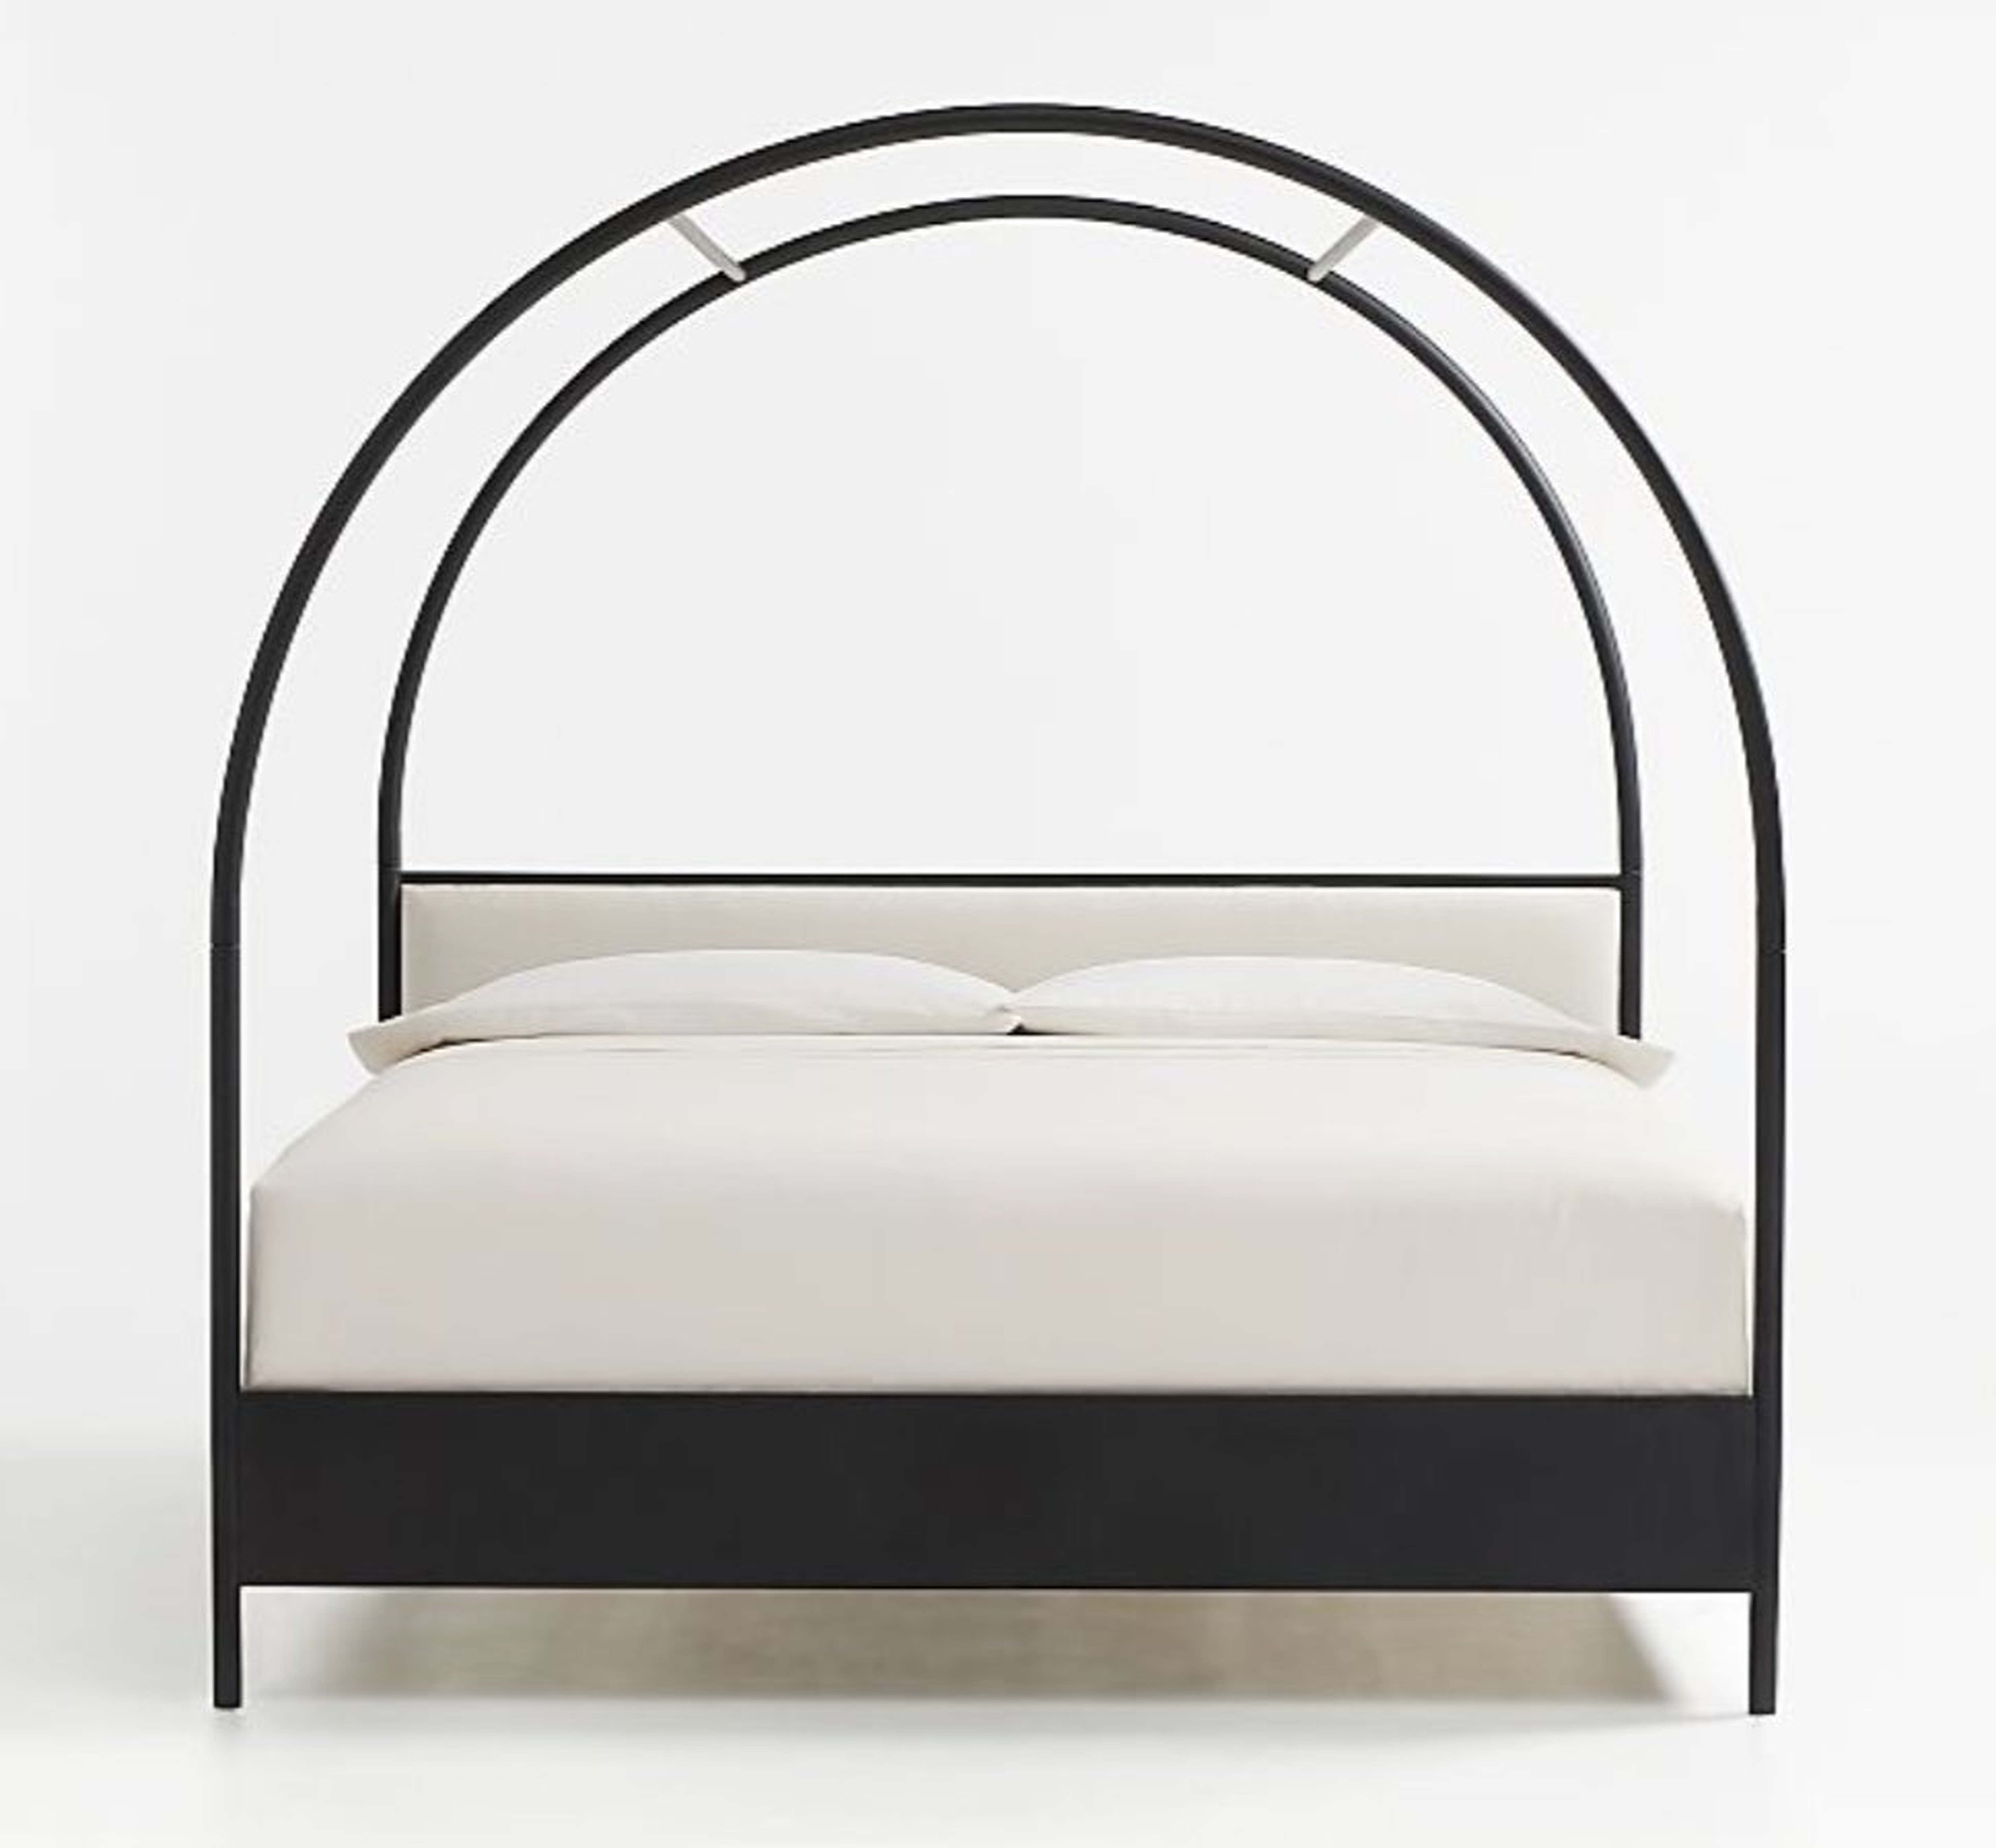 Canyon King Arched Canopy Bed with Upholstered Headboard - Crate and Barrel